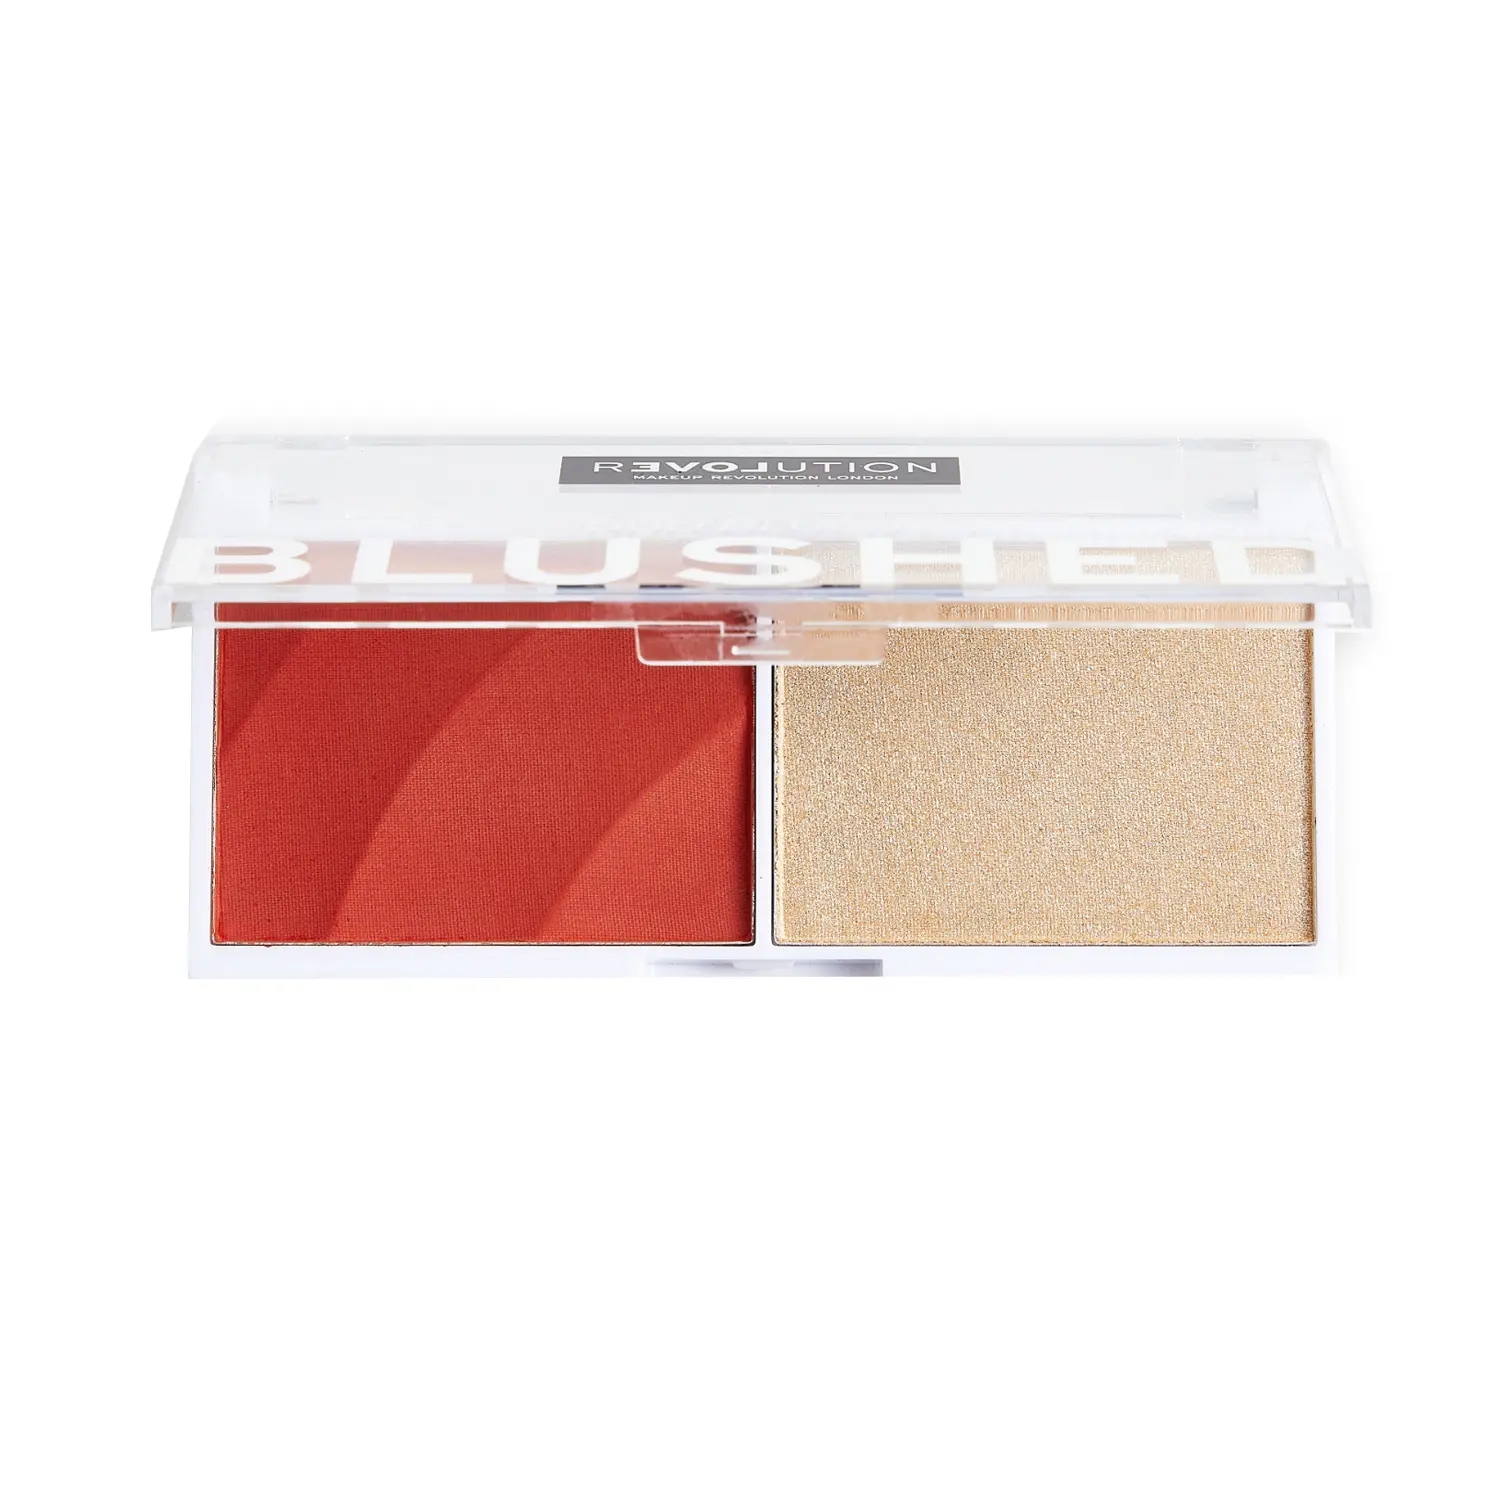 Makeup Revolution Remove Colour Play Blushed Duo Face Palette - Daydream (5.8g)